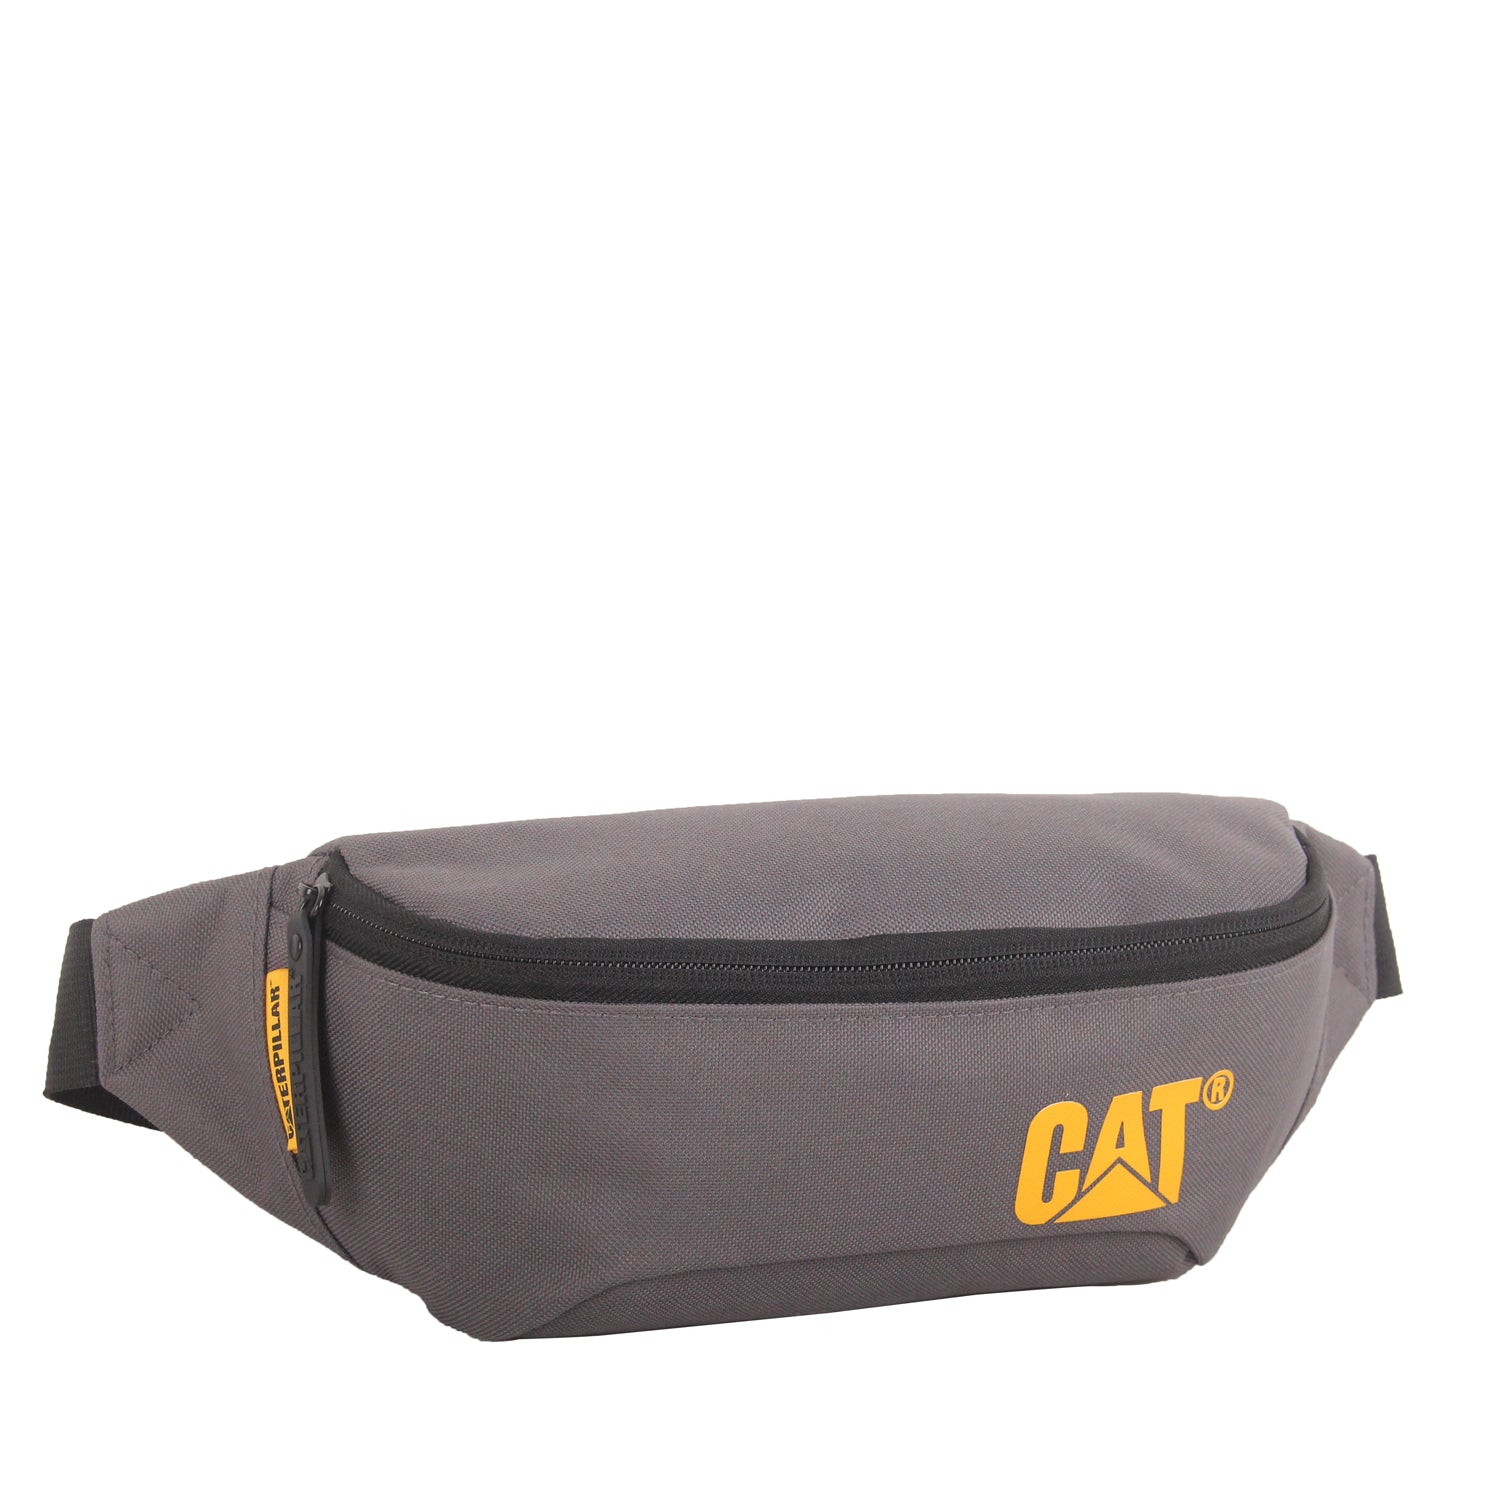 CAT - 83615-06 PROJECT waist bag -Anthracite-1